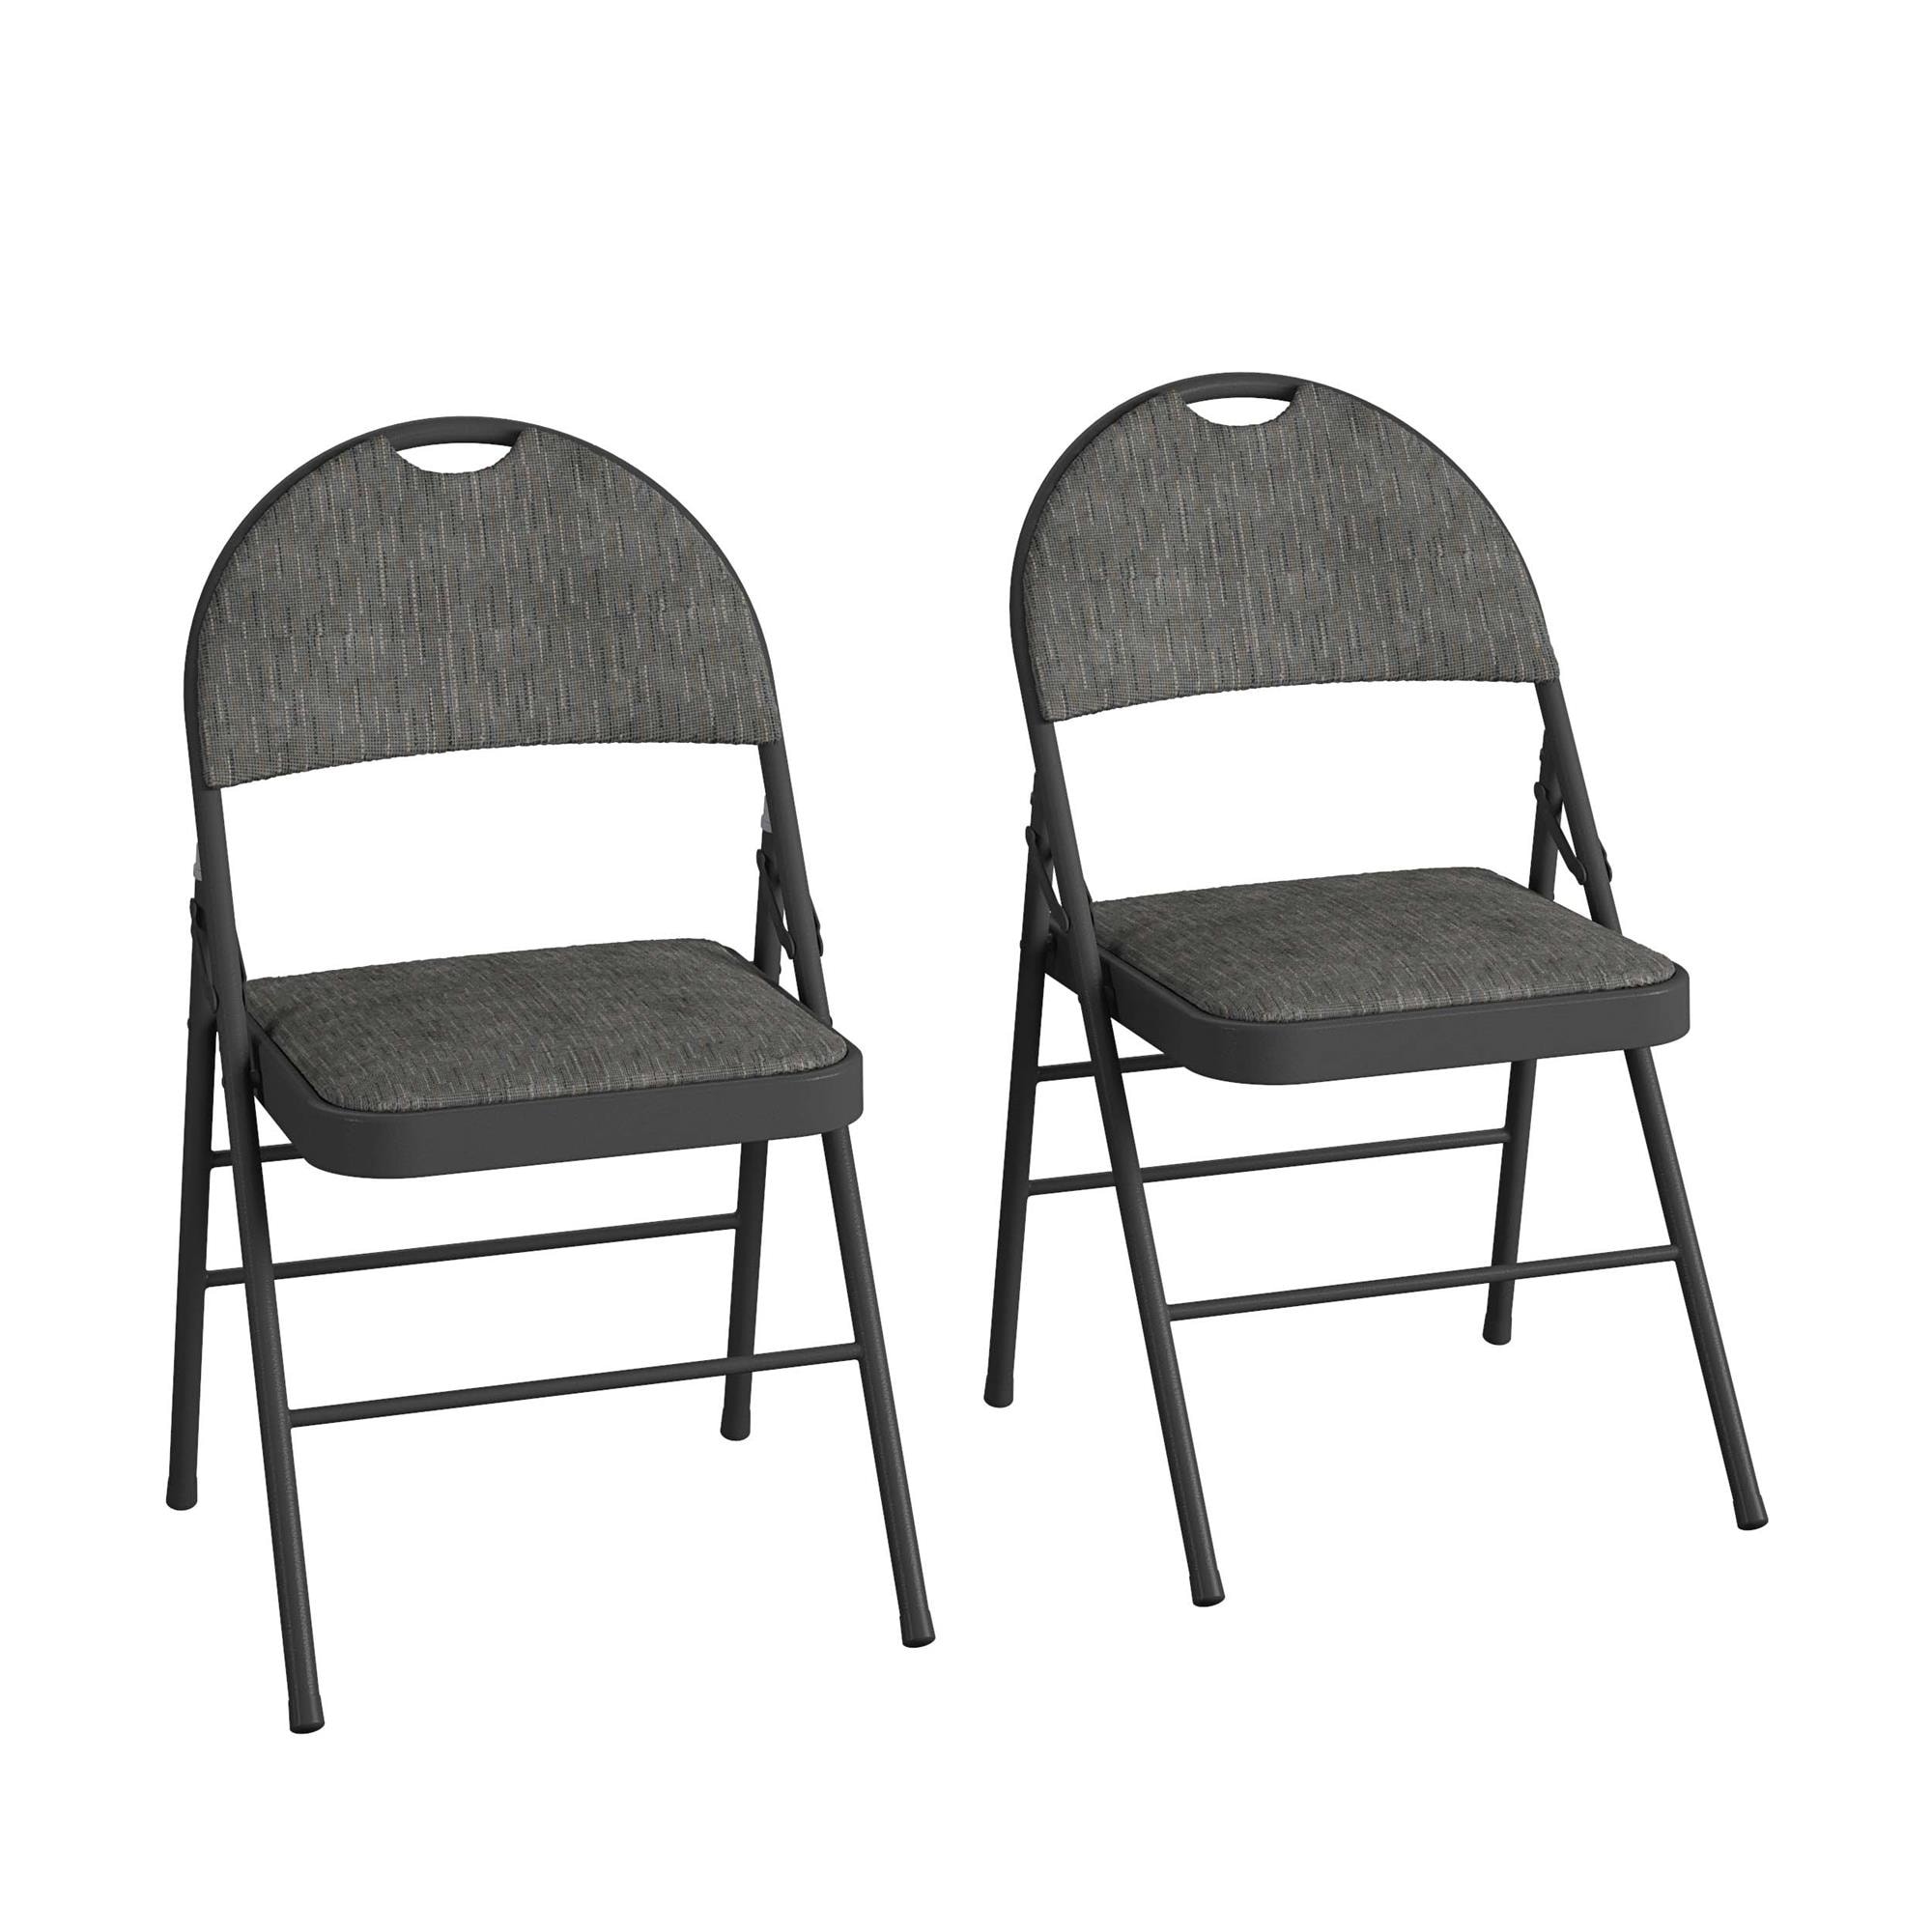 https://ak1.ostkcdn.com/images/products/is/images/direct/2471c1f68ef40a6faddd28593555005641f5851a/Cosco-Superior-Comfort-Commercial-Fabric-Folding-Chair-with-Scotchgard.jpg